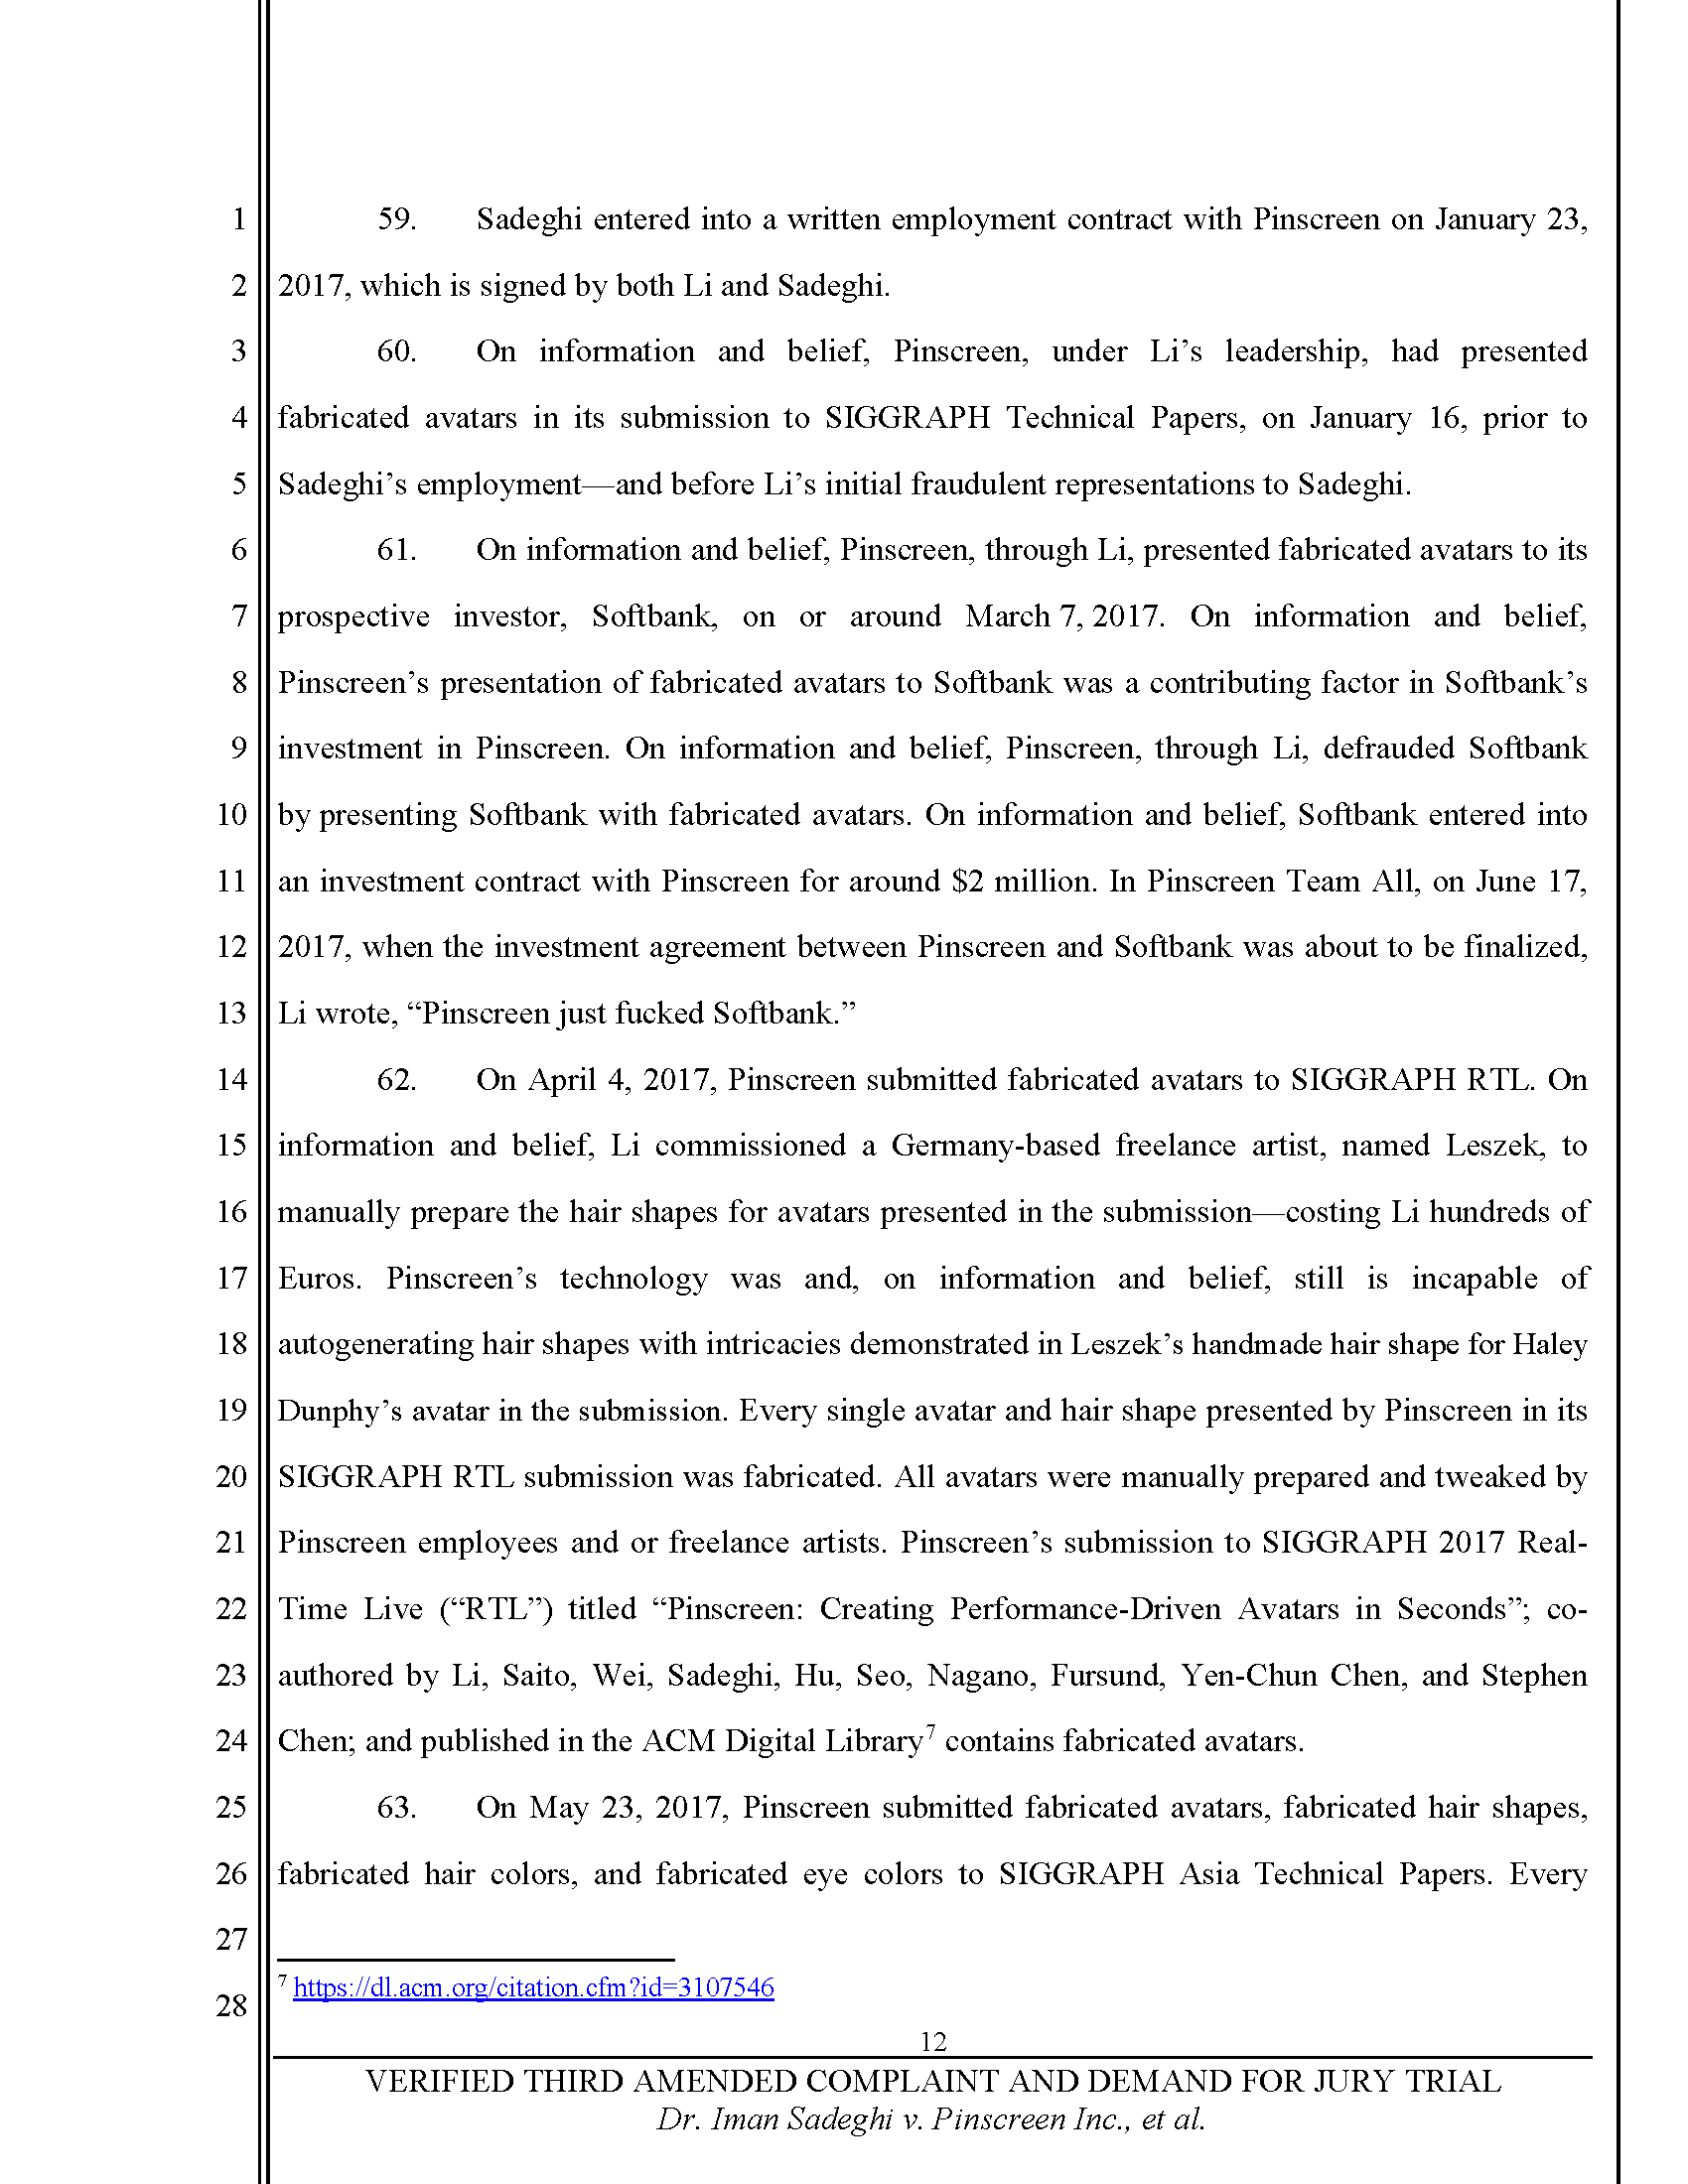 Third Amended Complaint (TAC) Page 13